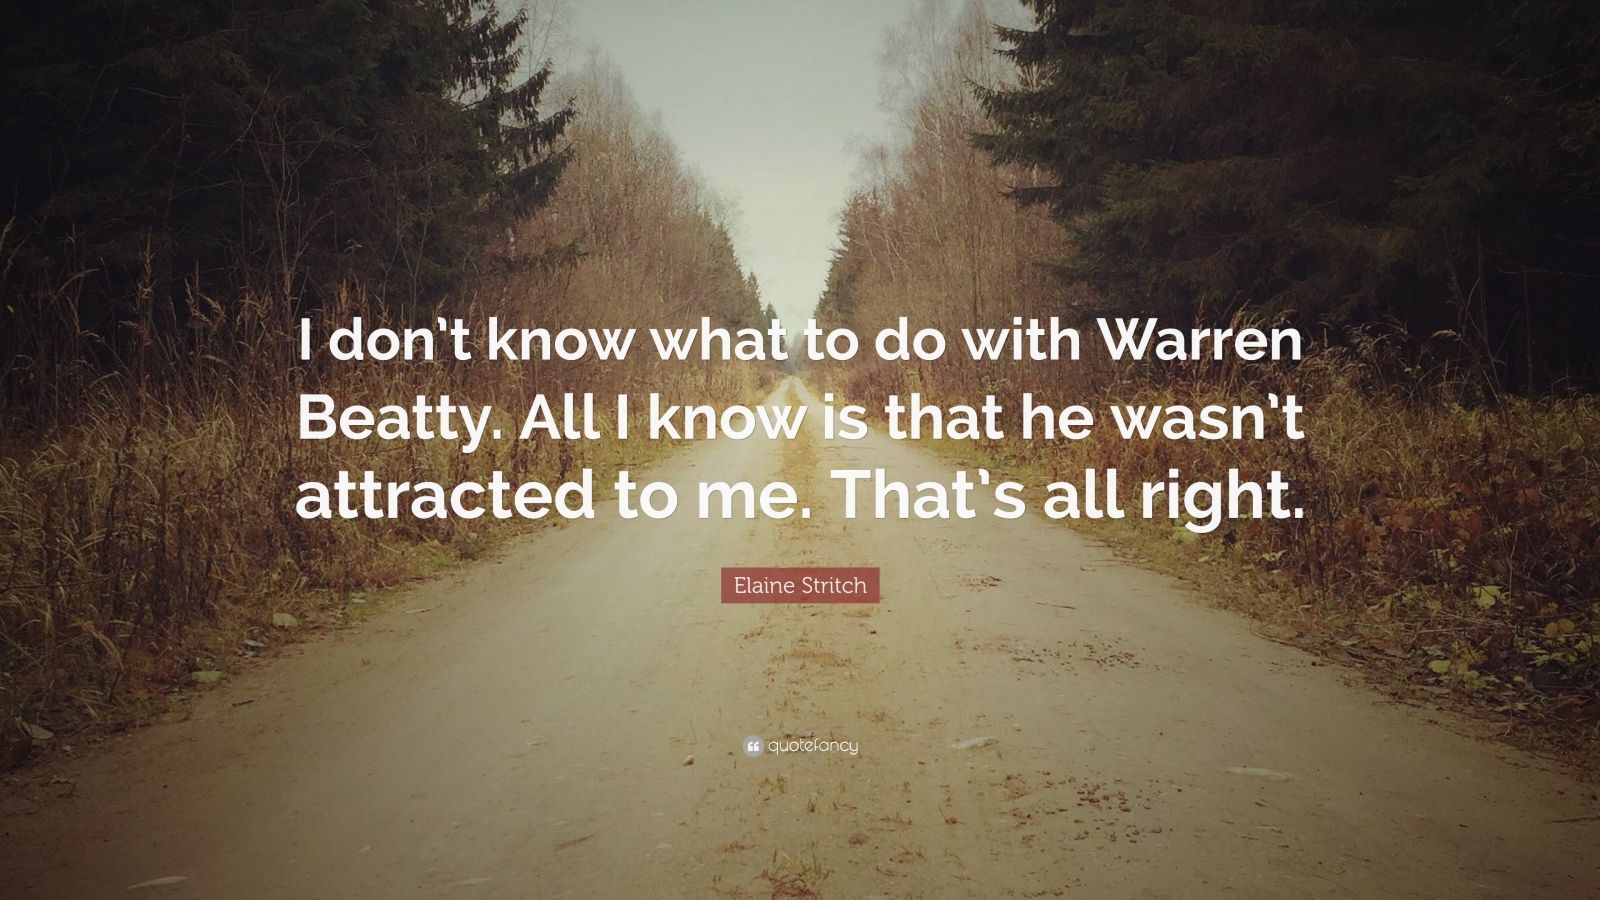 Elaine Stritch Quote: "I don't know what to do with Warren Beatty. All I know is that he wasn't ...